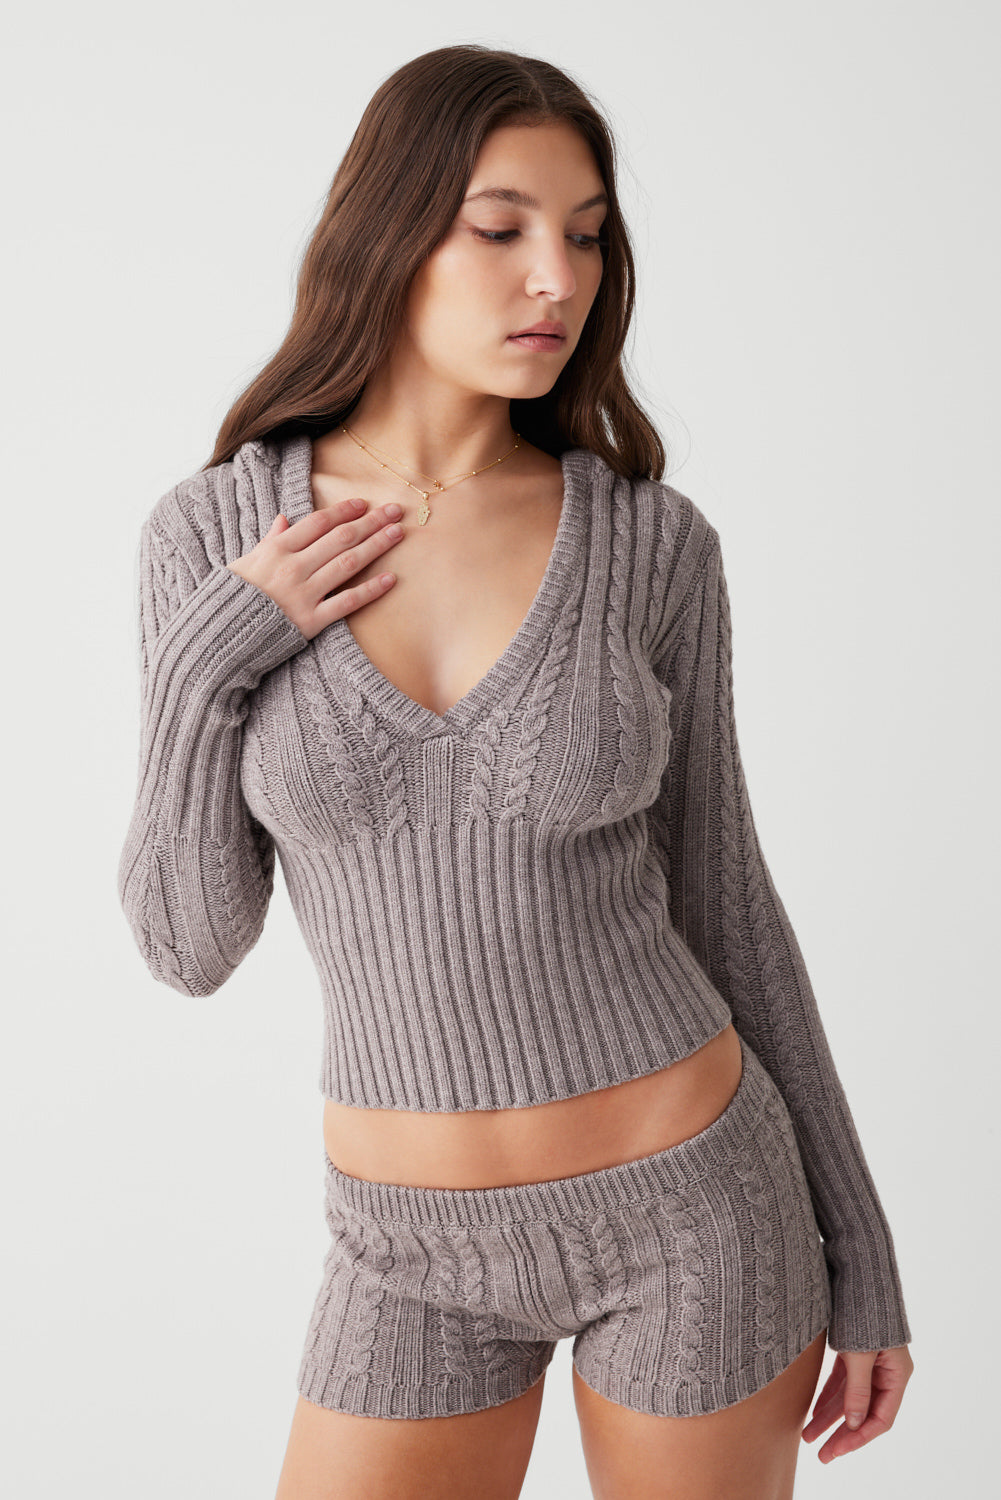 Evermore Cable Cloud Knit Sweater - Dark Pearl